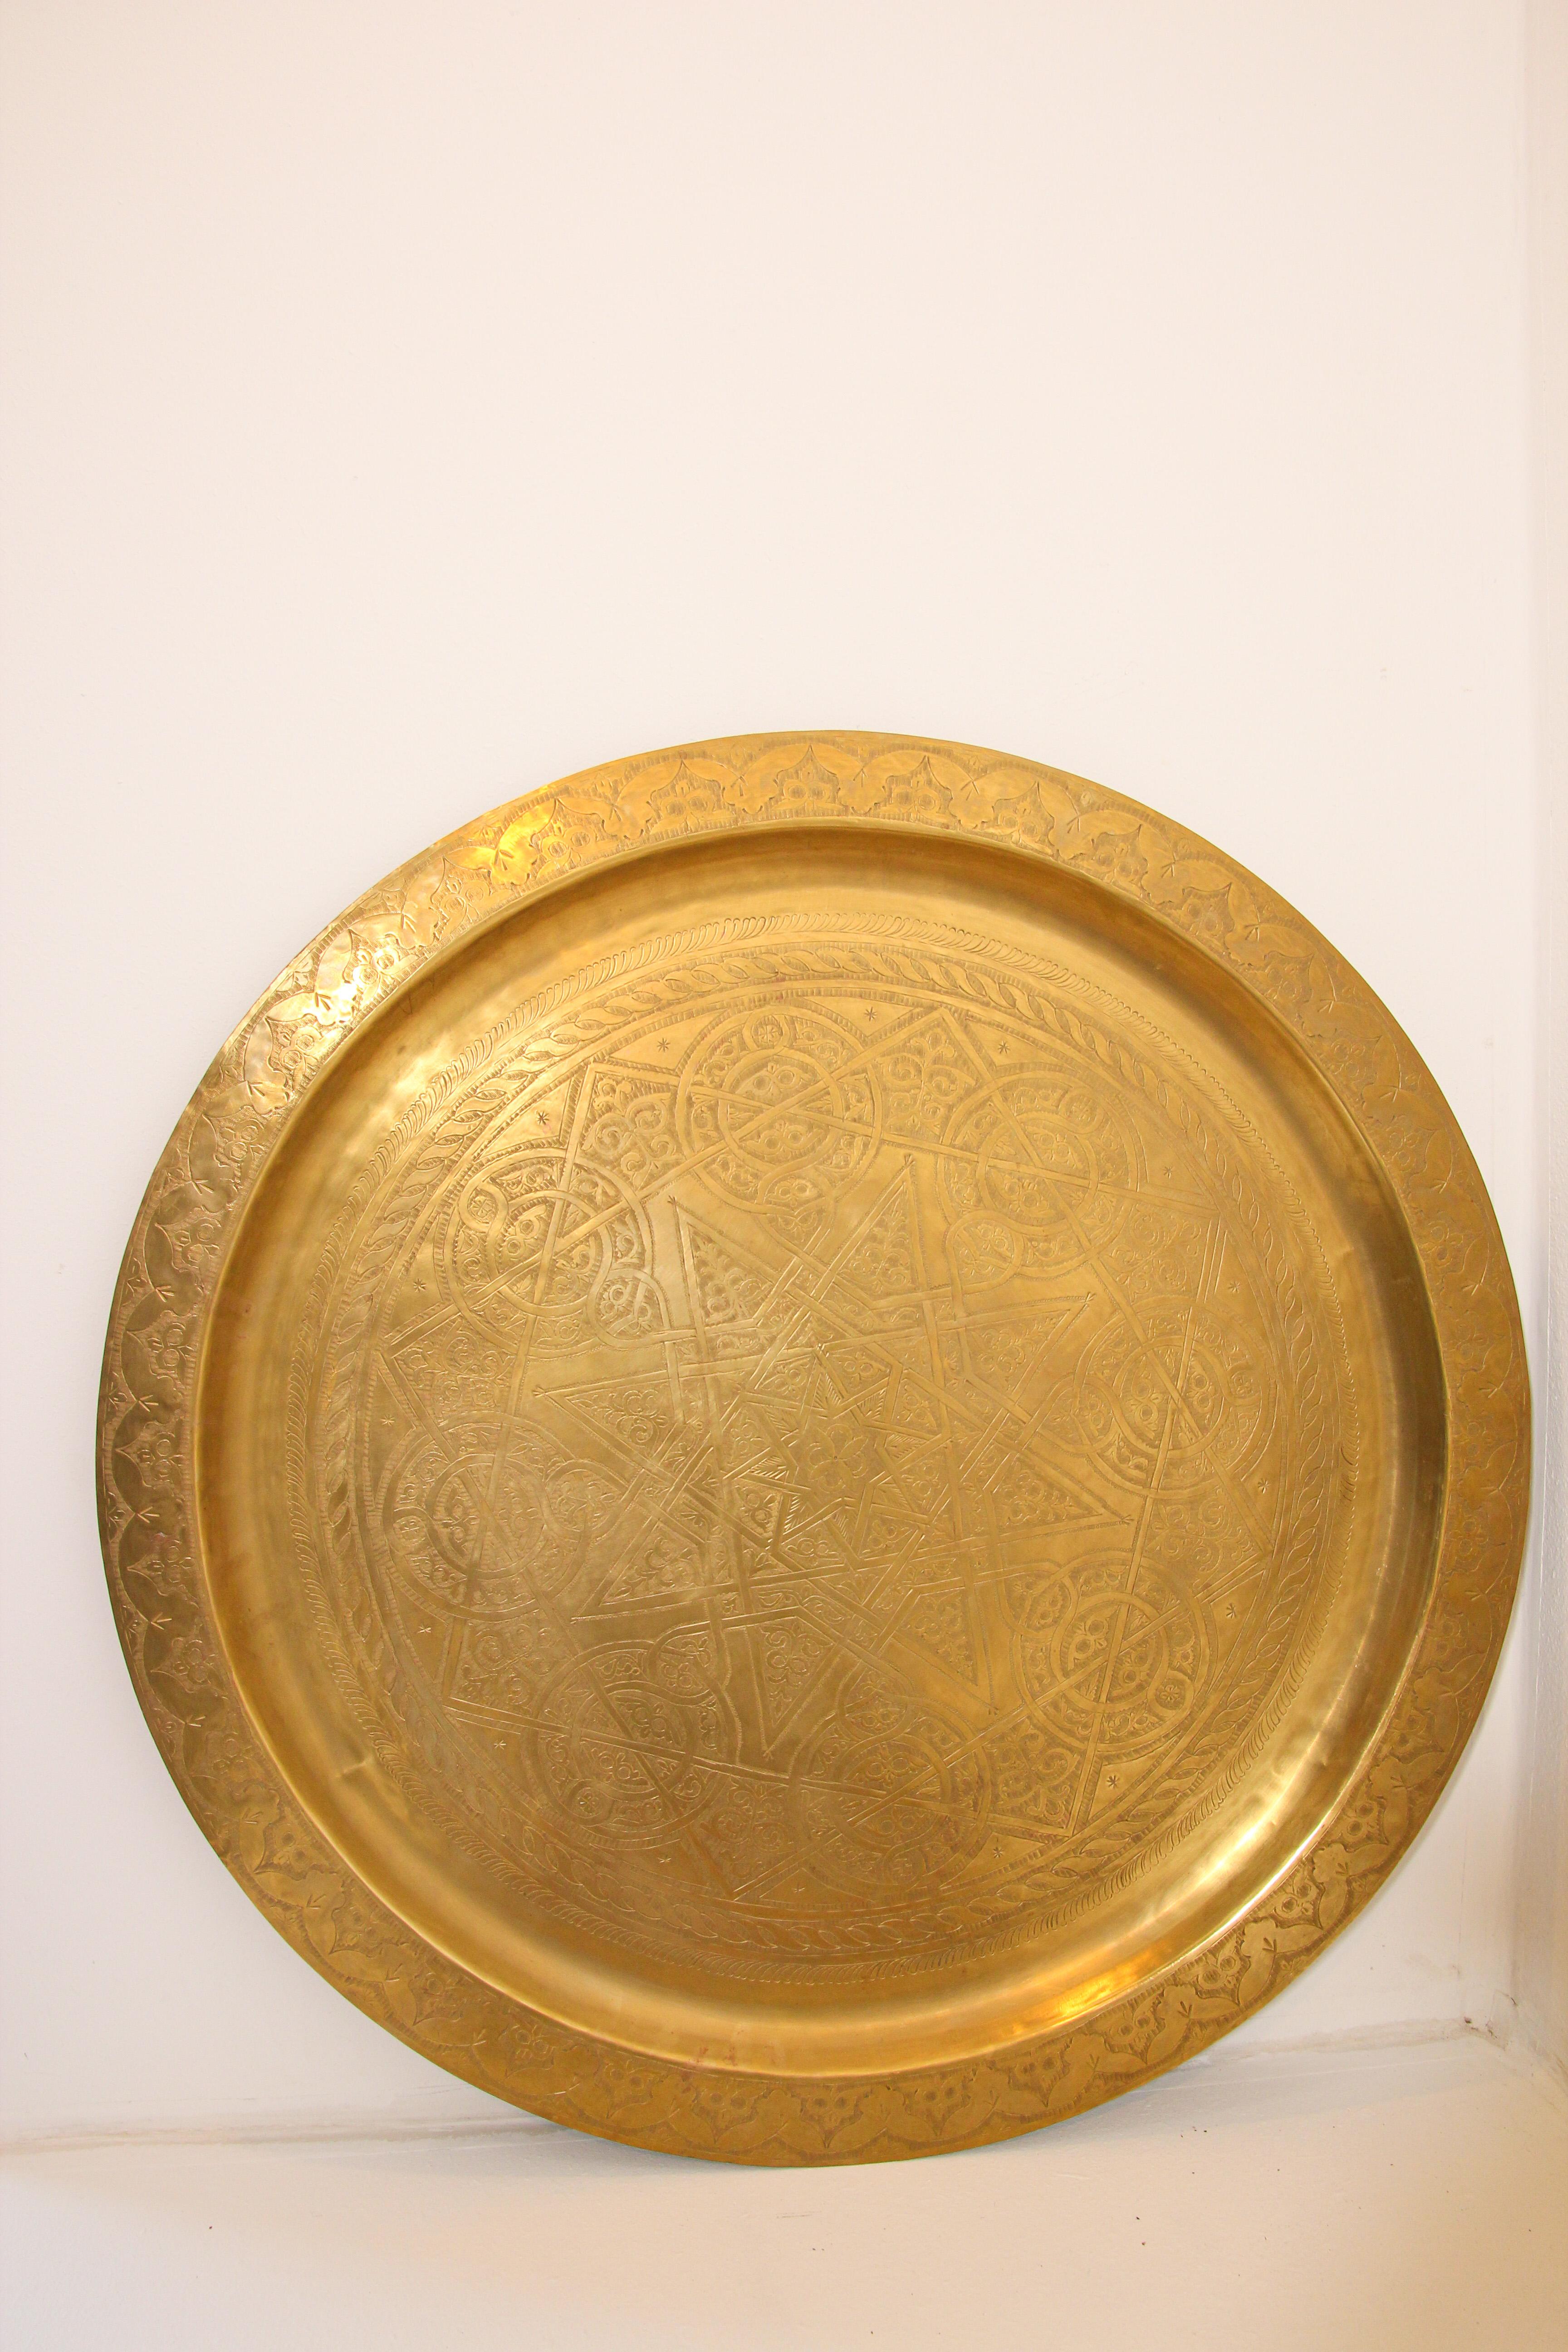 Antique Moroccan large metal polished round brass tray platter.
Polished decorative metal brass round tray with very fine intricate designs.
Finely hand-hammered and chiseled in floral and geometrical Moorish designs.
Heavy brass metal circular